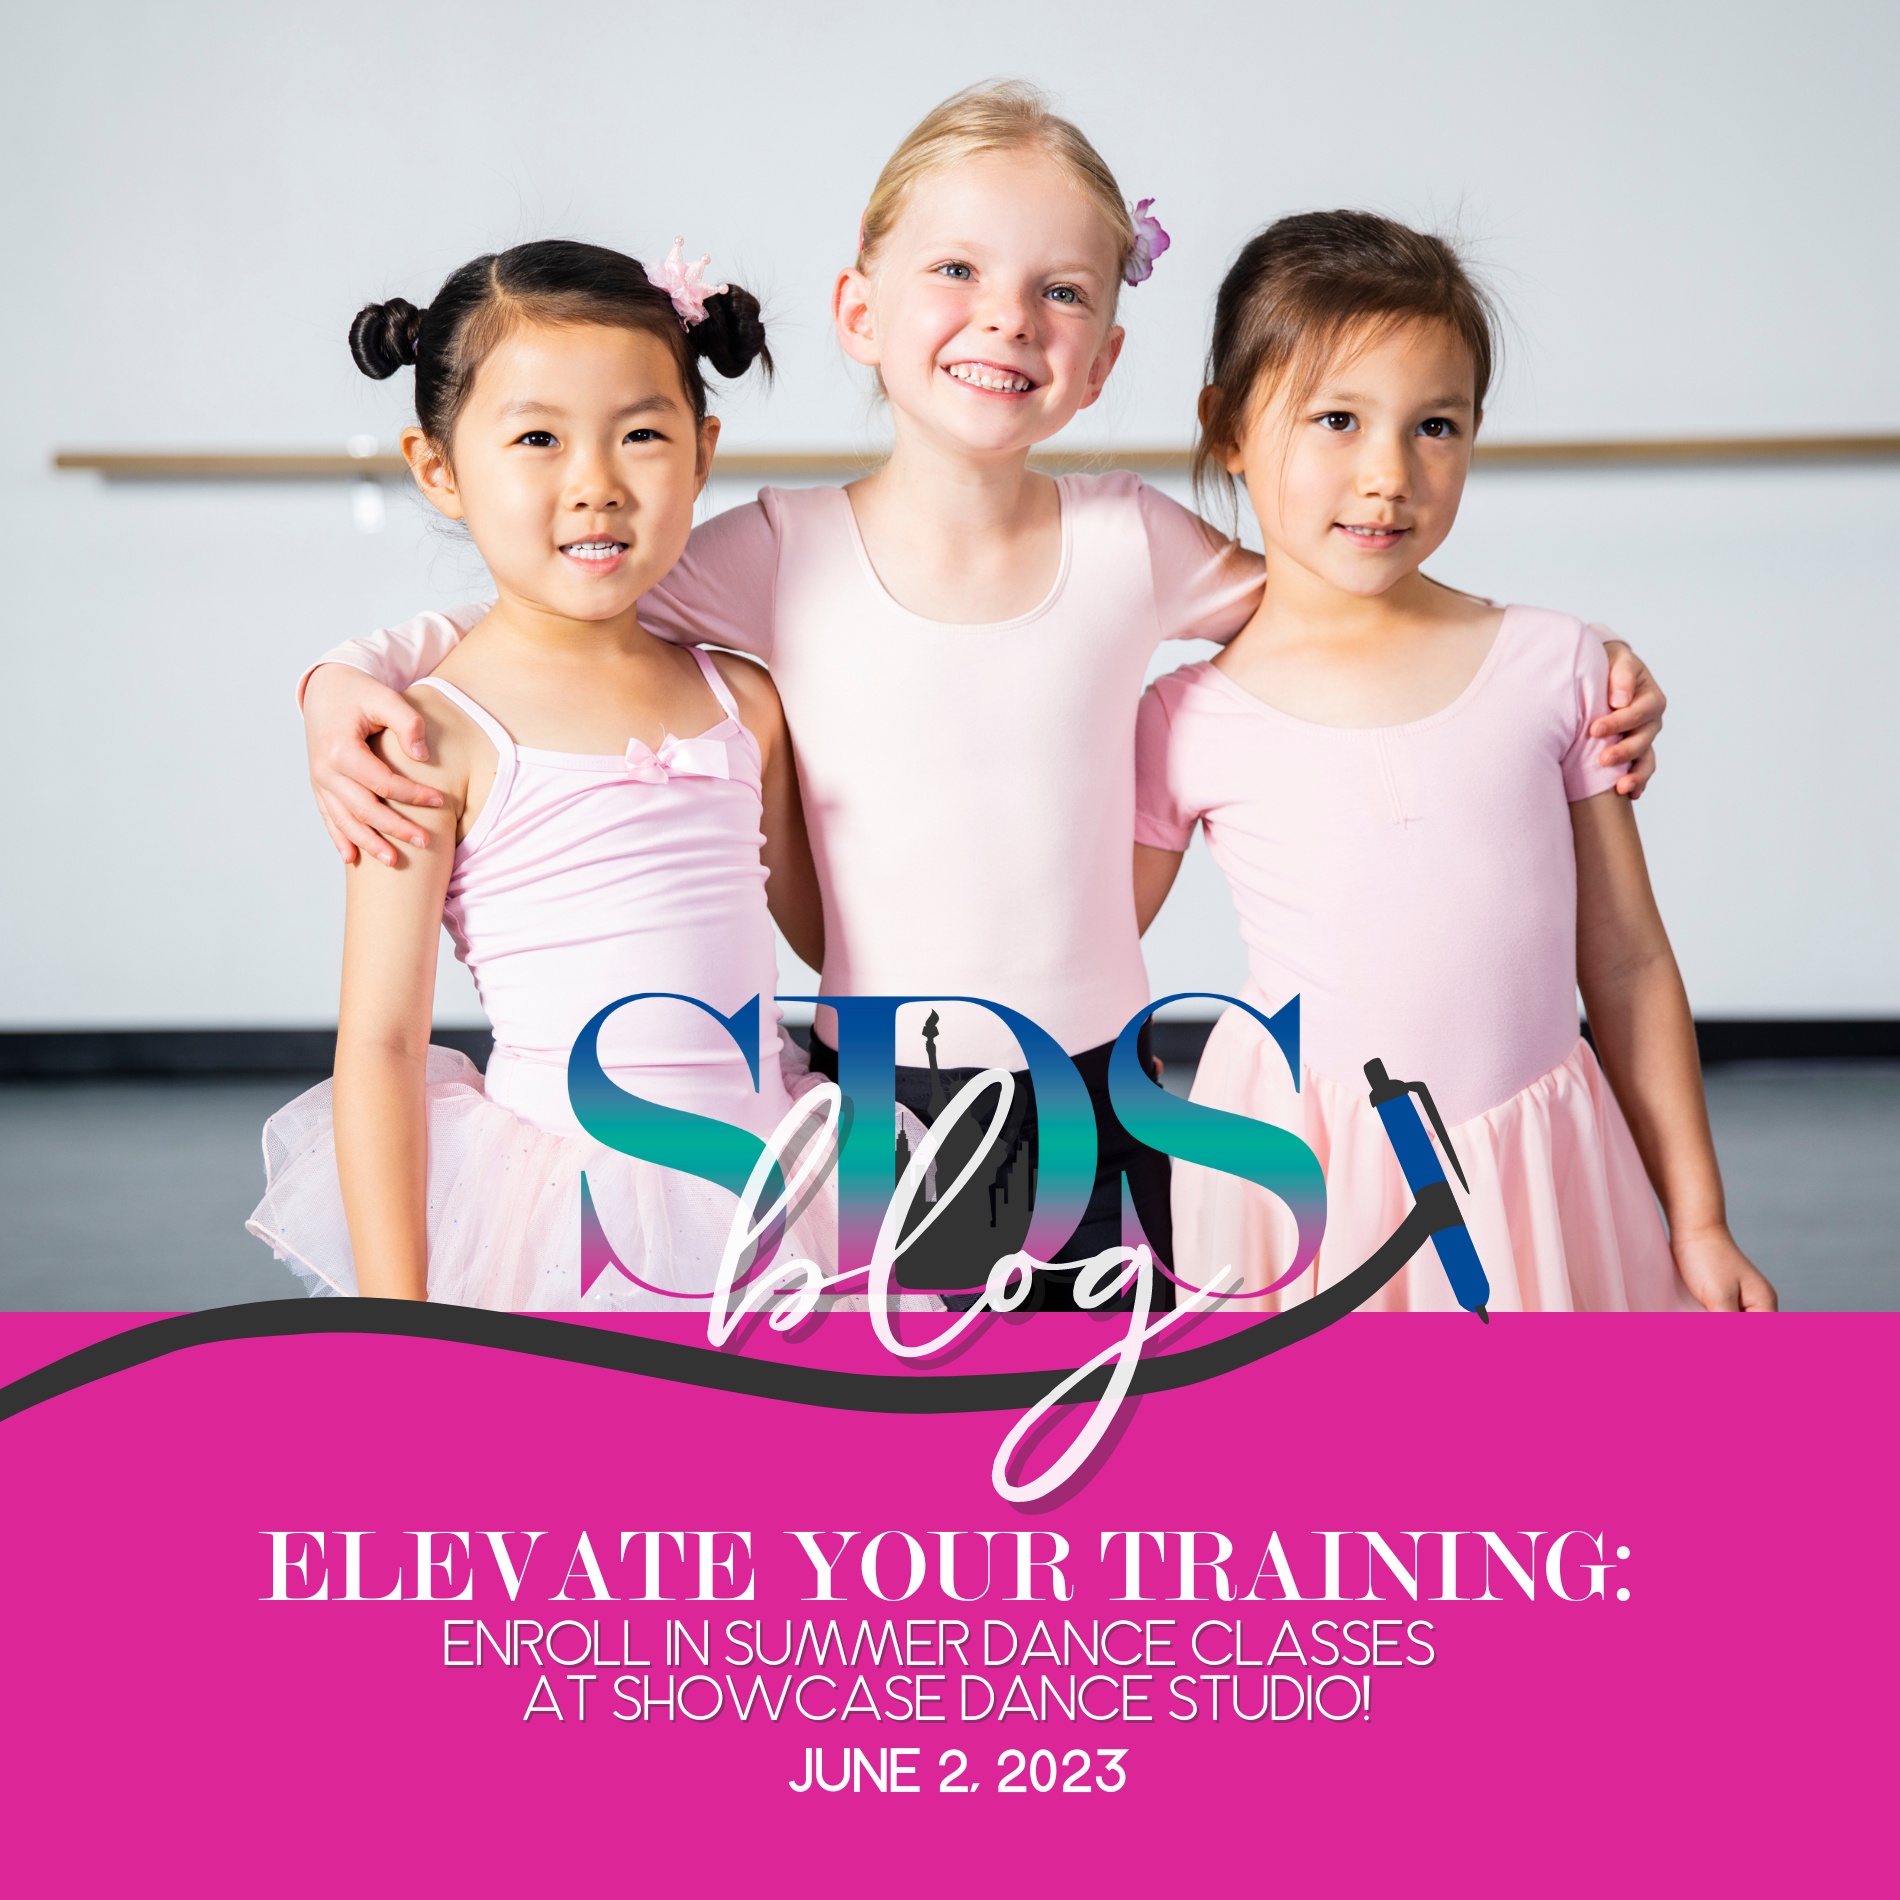 Elevate your training:  Enroll in Summer Dance Classes at Showcase Dance Studio!